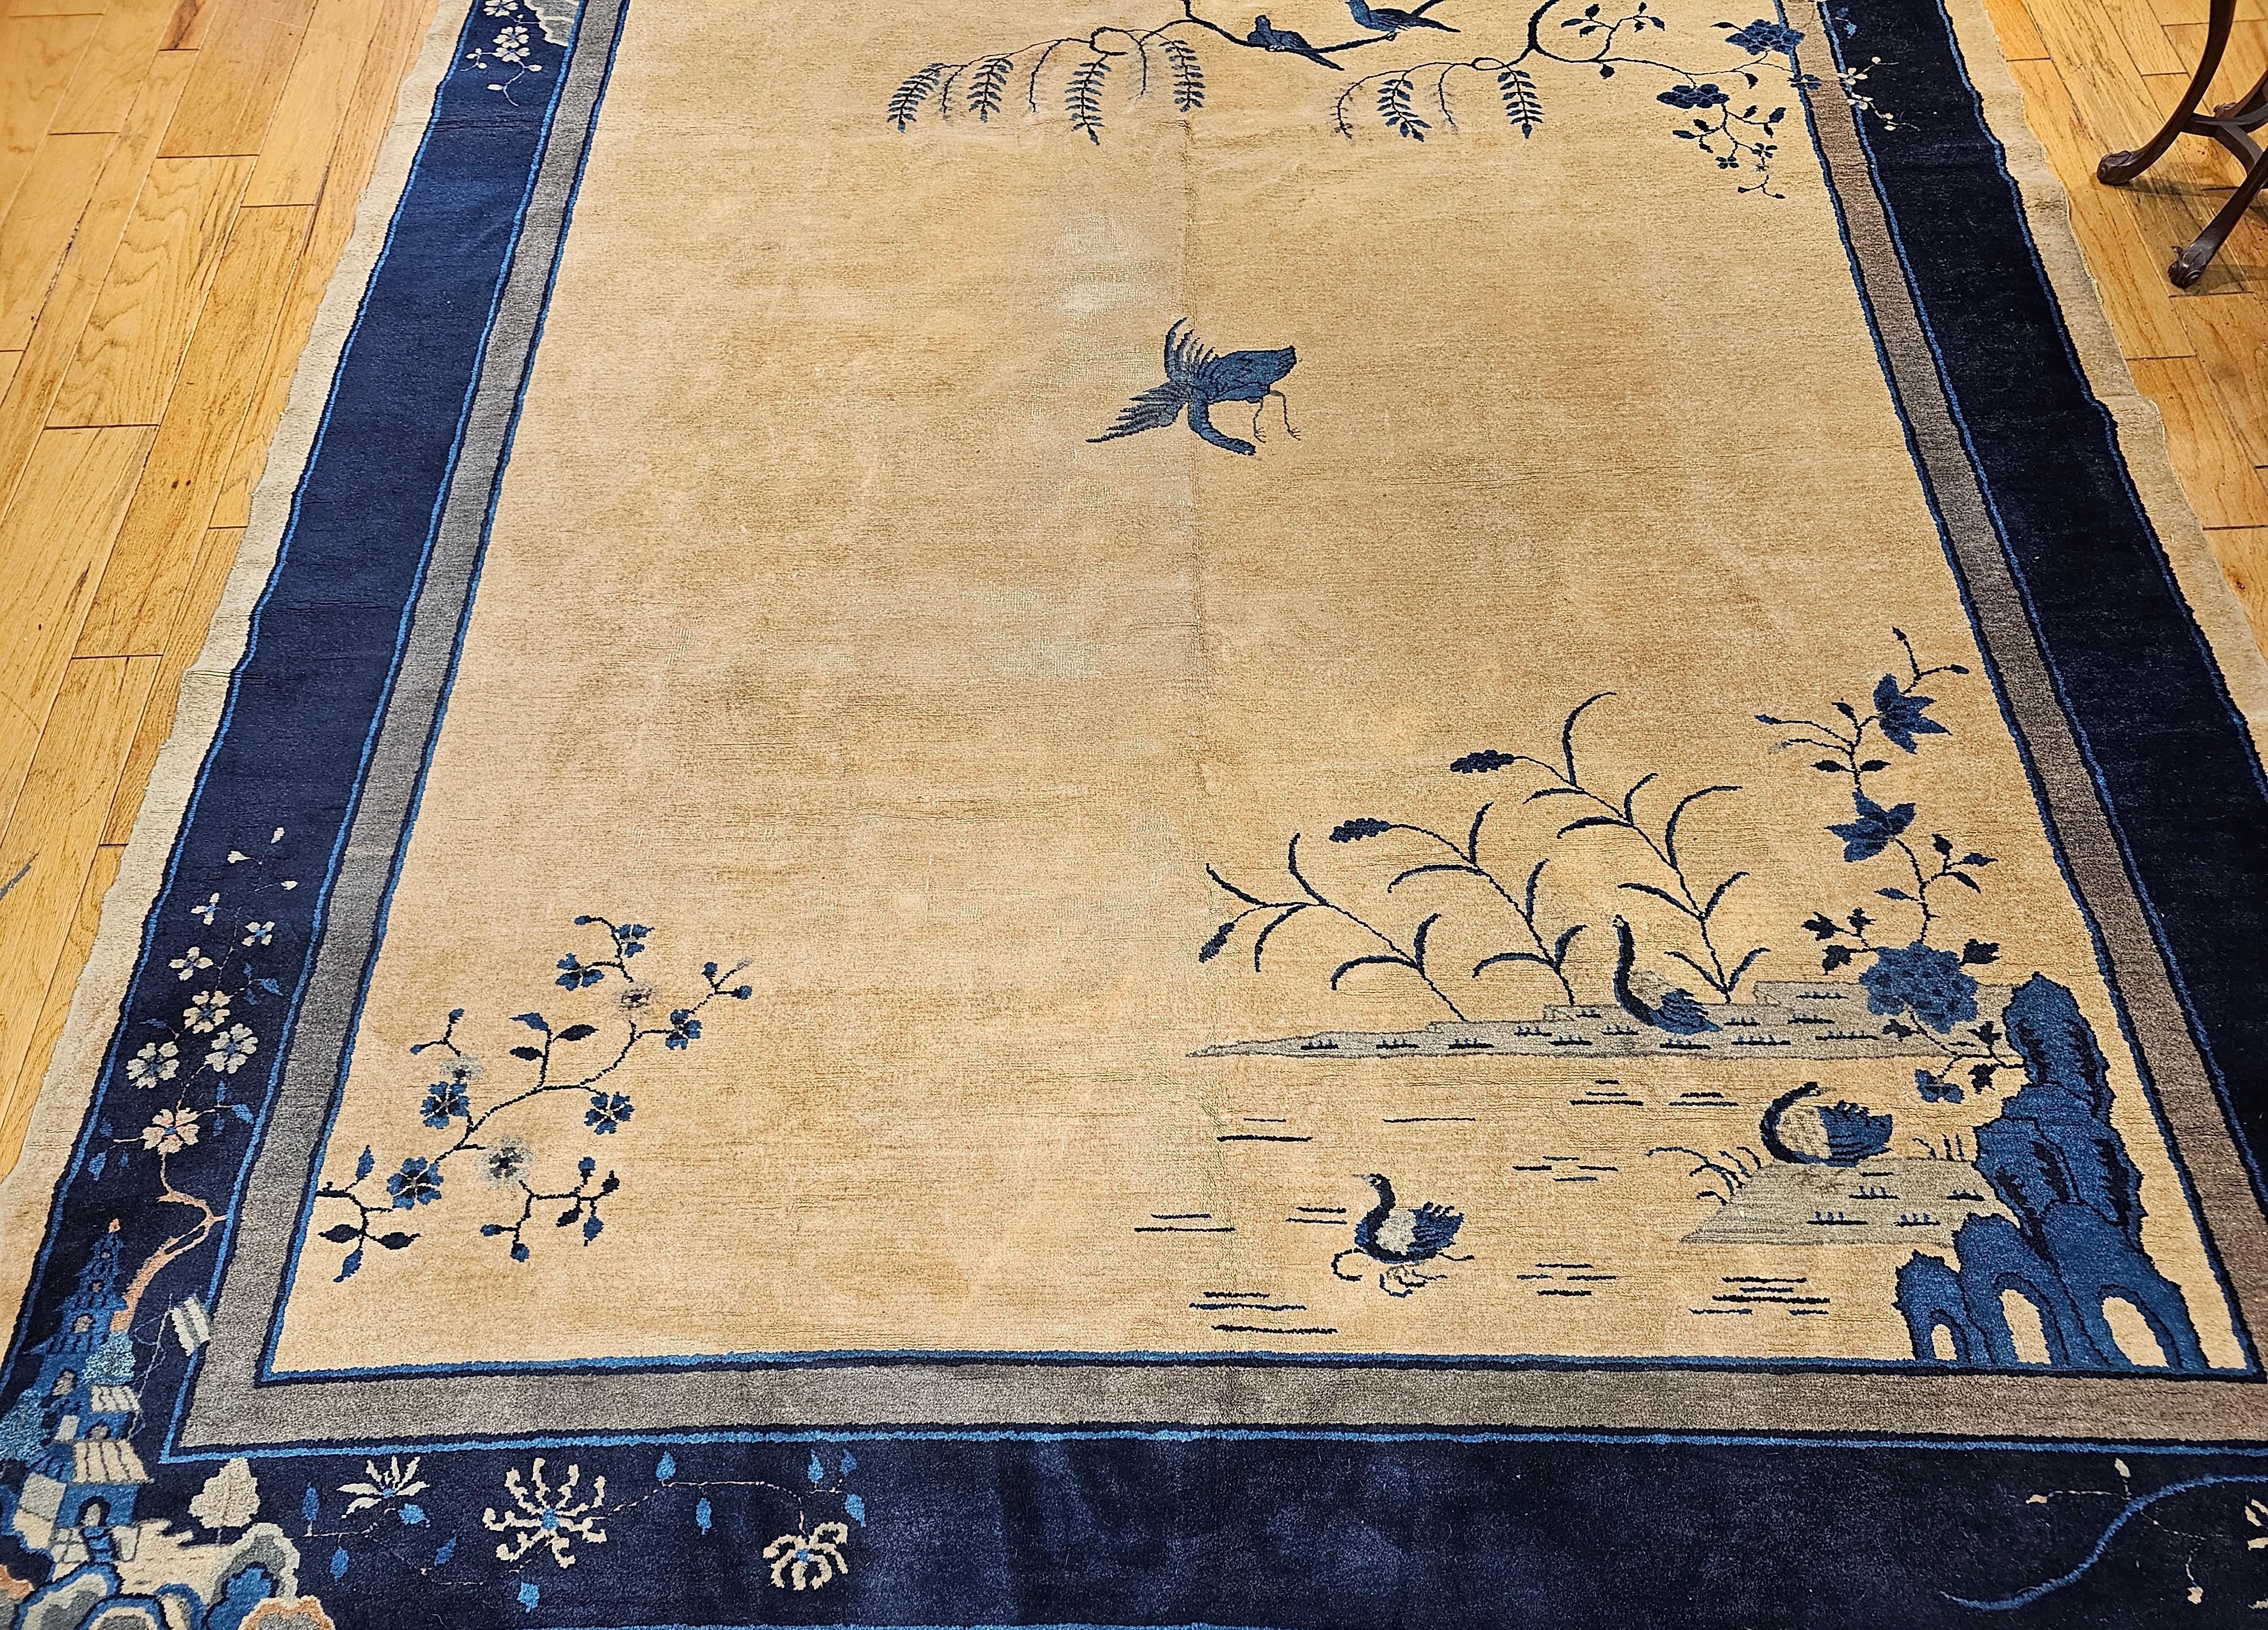 Vintage Art Deco Chinese Rug with Cranes, Pagoda, Mountains in Wheat, Blue, Navy For Sale 7